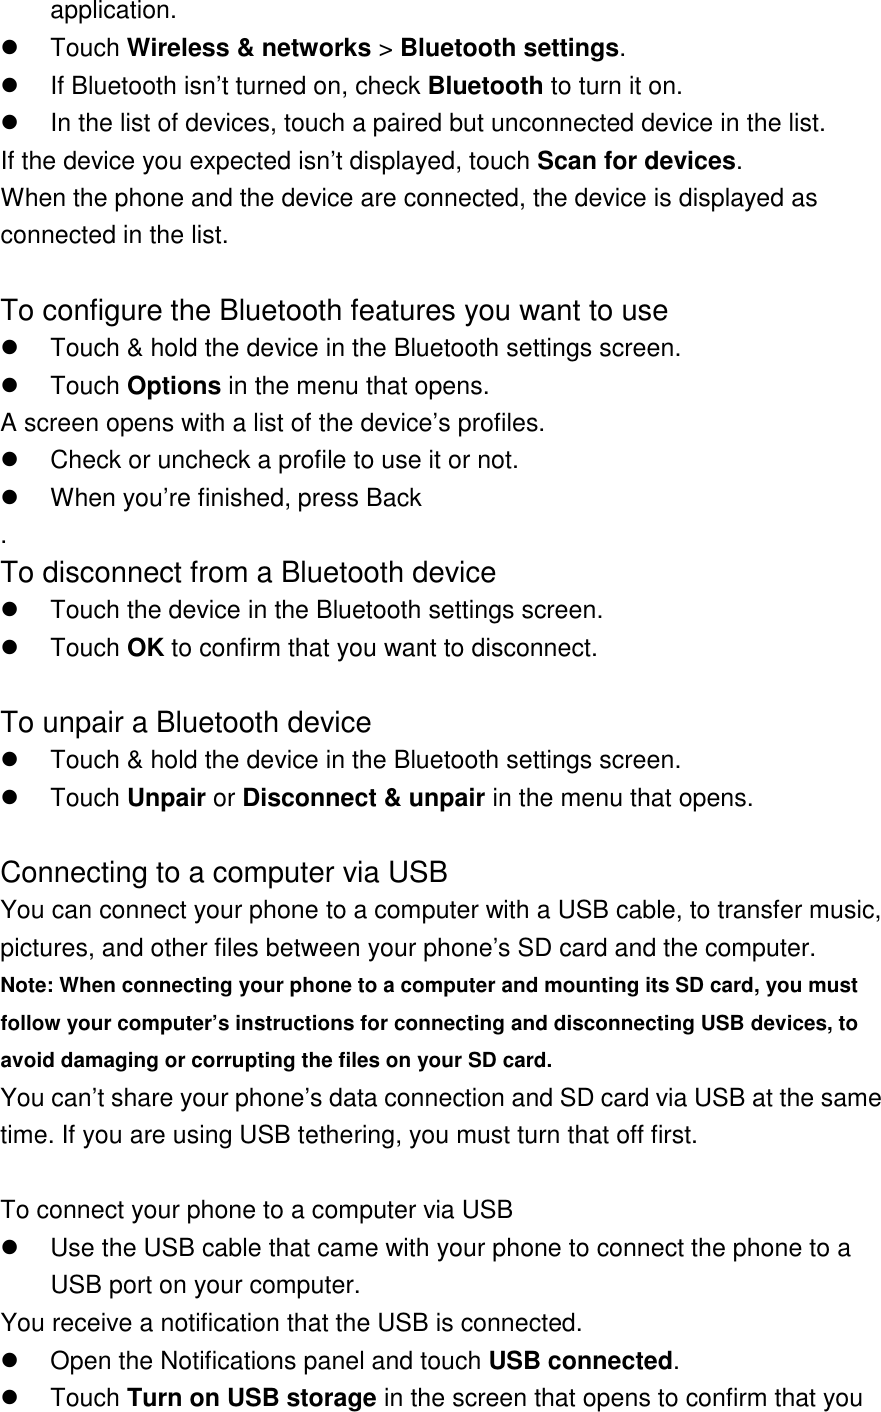 application.   Touch Wireless &amp; networks &gt; Bluetooth settings.   If Bluetooth isn’t turned on, check Bluetooth to turn it on.   In the list of devices, touch a paired but unconnected device in the list. If the device you expected isn’t displayed, touch Scan for devices. When the phone and the device are connected, the device is displayed as connected in the list.  To configure the Bluetooth features you want to use   Touch &amp; hold the device in the Bluetooth settings screen.   Touch Options in the menu that opens. A screen opens with a list of the device’s profiles.   Check or uncheck a profile to use it or not.   When you’re finished, press Back . To disconnect from a Bluetooth device   Touch the device in the Bluetooth settings screen.   Touch OK to confirm that you want to disconnect.  To unpair a Bluetooth device   Touch &amp; hold the device in the Bluetooth settings screen.   Touch Unpair or Disconnect &amp; unpair in the menu that opens.  Connecting to a computer via USB You can connect your phone to a computer with a USB cable, to transfer music, pictures, and other files between your phone’s SD card and the computer. Note: When connecting your phone to a computer and mounting its SD card, you must follow your computer’s instructions for connecting and disconnecting USB devices, to avoid damaging or corrupting the files on your SD card. You can’t share your phone’s data connection and SD card via USB at the same time. If you are using USB tethering, you must turn that off first.    To connect your phone to a computer via USB   Use the USB cable that came with your phone to connect the phone to a USB port on your computer. You receive a notification that the USB is connected.   Open the Notifications panel and touch USB connected.   Touch Turn on USB storage in the screen that opens to confirm that you 